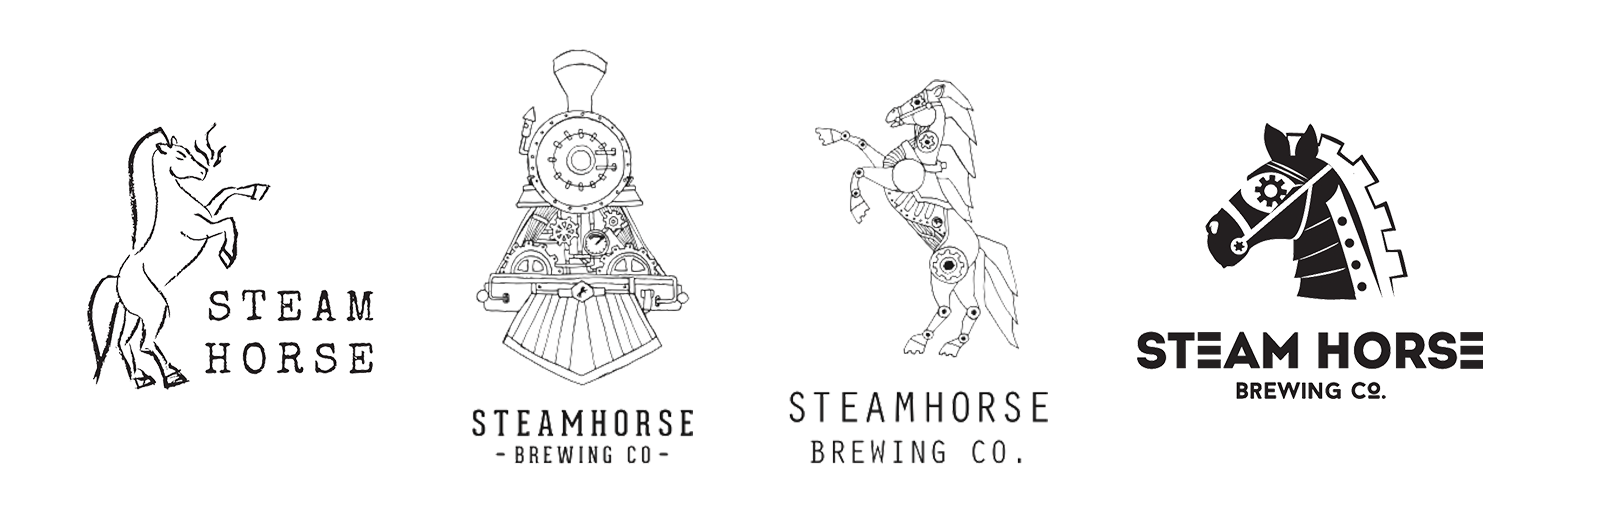 Illustrative logo explorations for Steam Horse Brewing Co featuring steampunk horses and a steam locomotive.